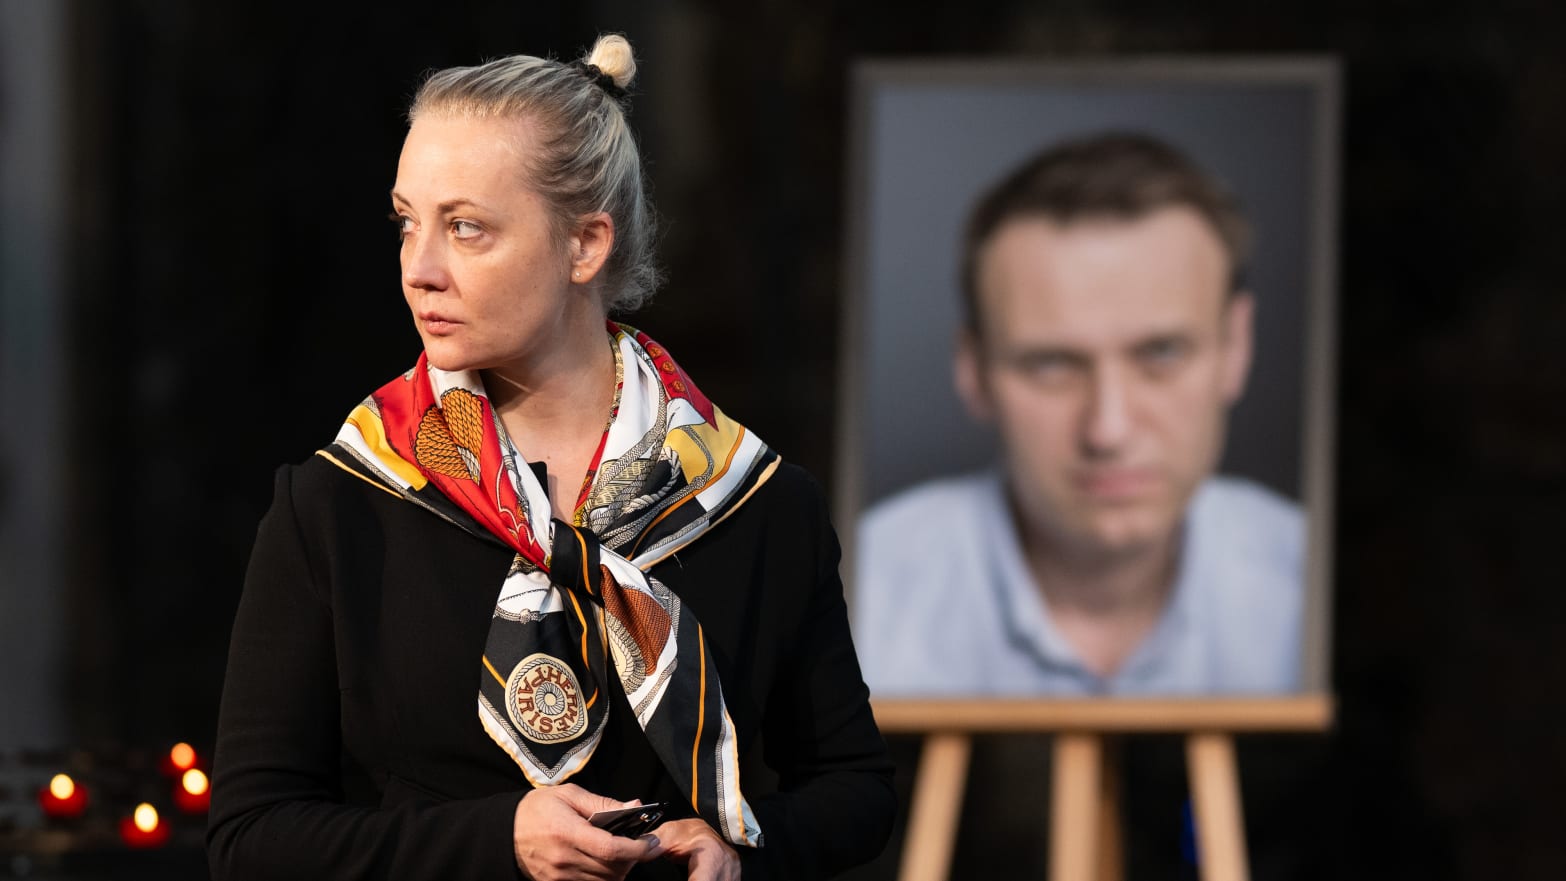 Yulia Navalnaya, widow of Alexei Navalny, walks away from his picture after lighting a candle at the end of a service in St. Mary's Church